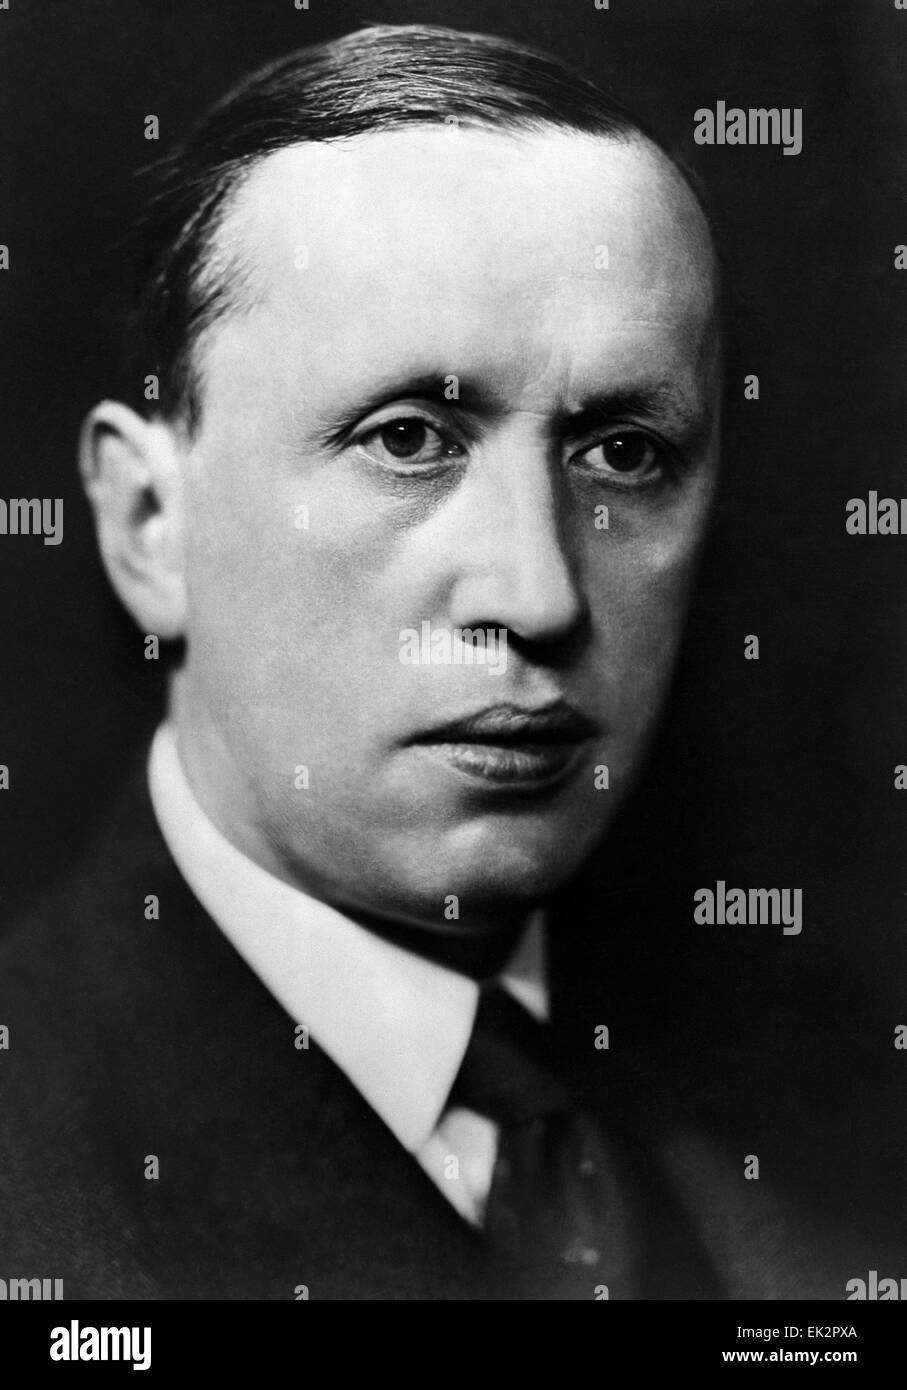 Karel Capek High Resolution Stock Photography and Images - Alamy